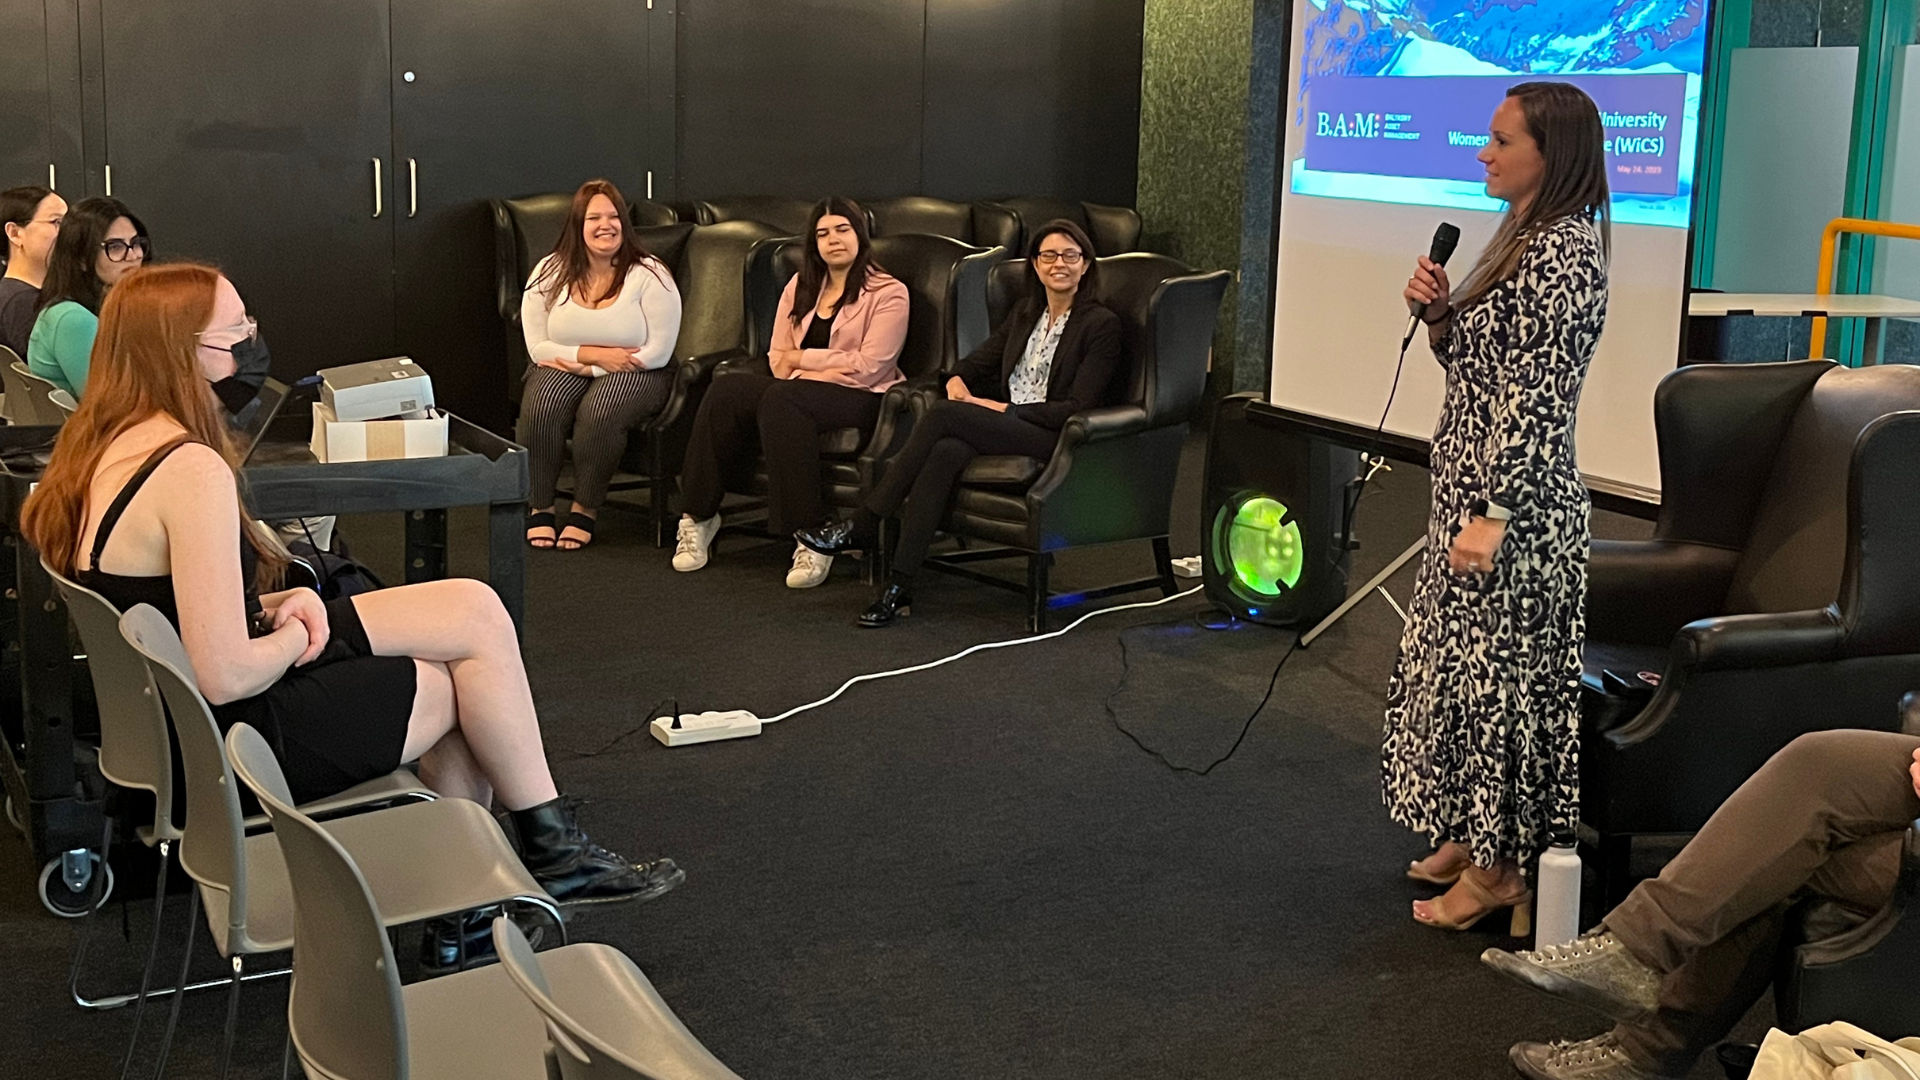 Hannah Dinardo, head of campus recruiting at BAM, speaks to the attendees of the fireside chat on May 24, 2023 in the Davis Centre.